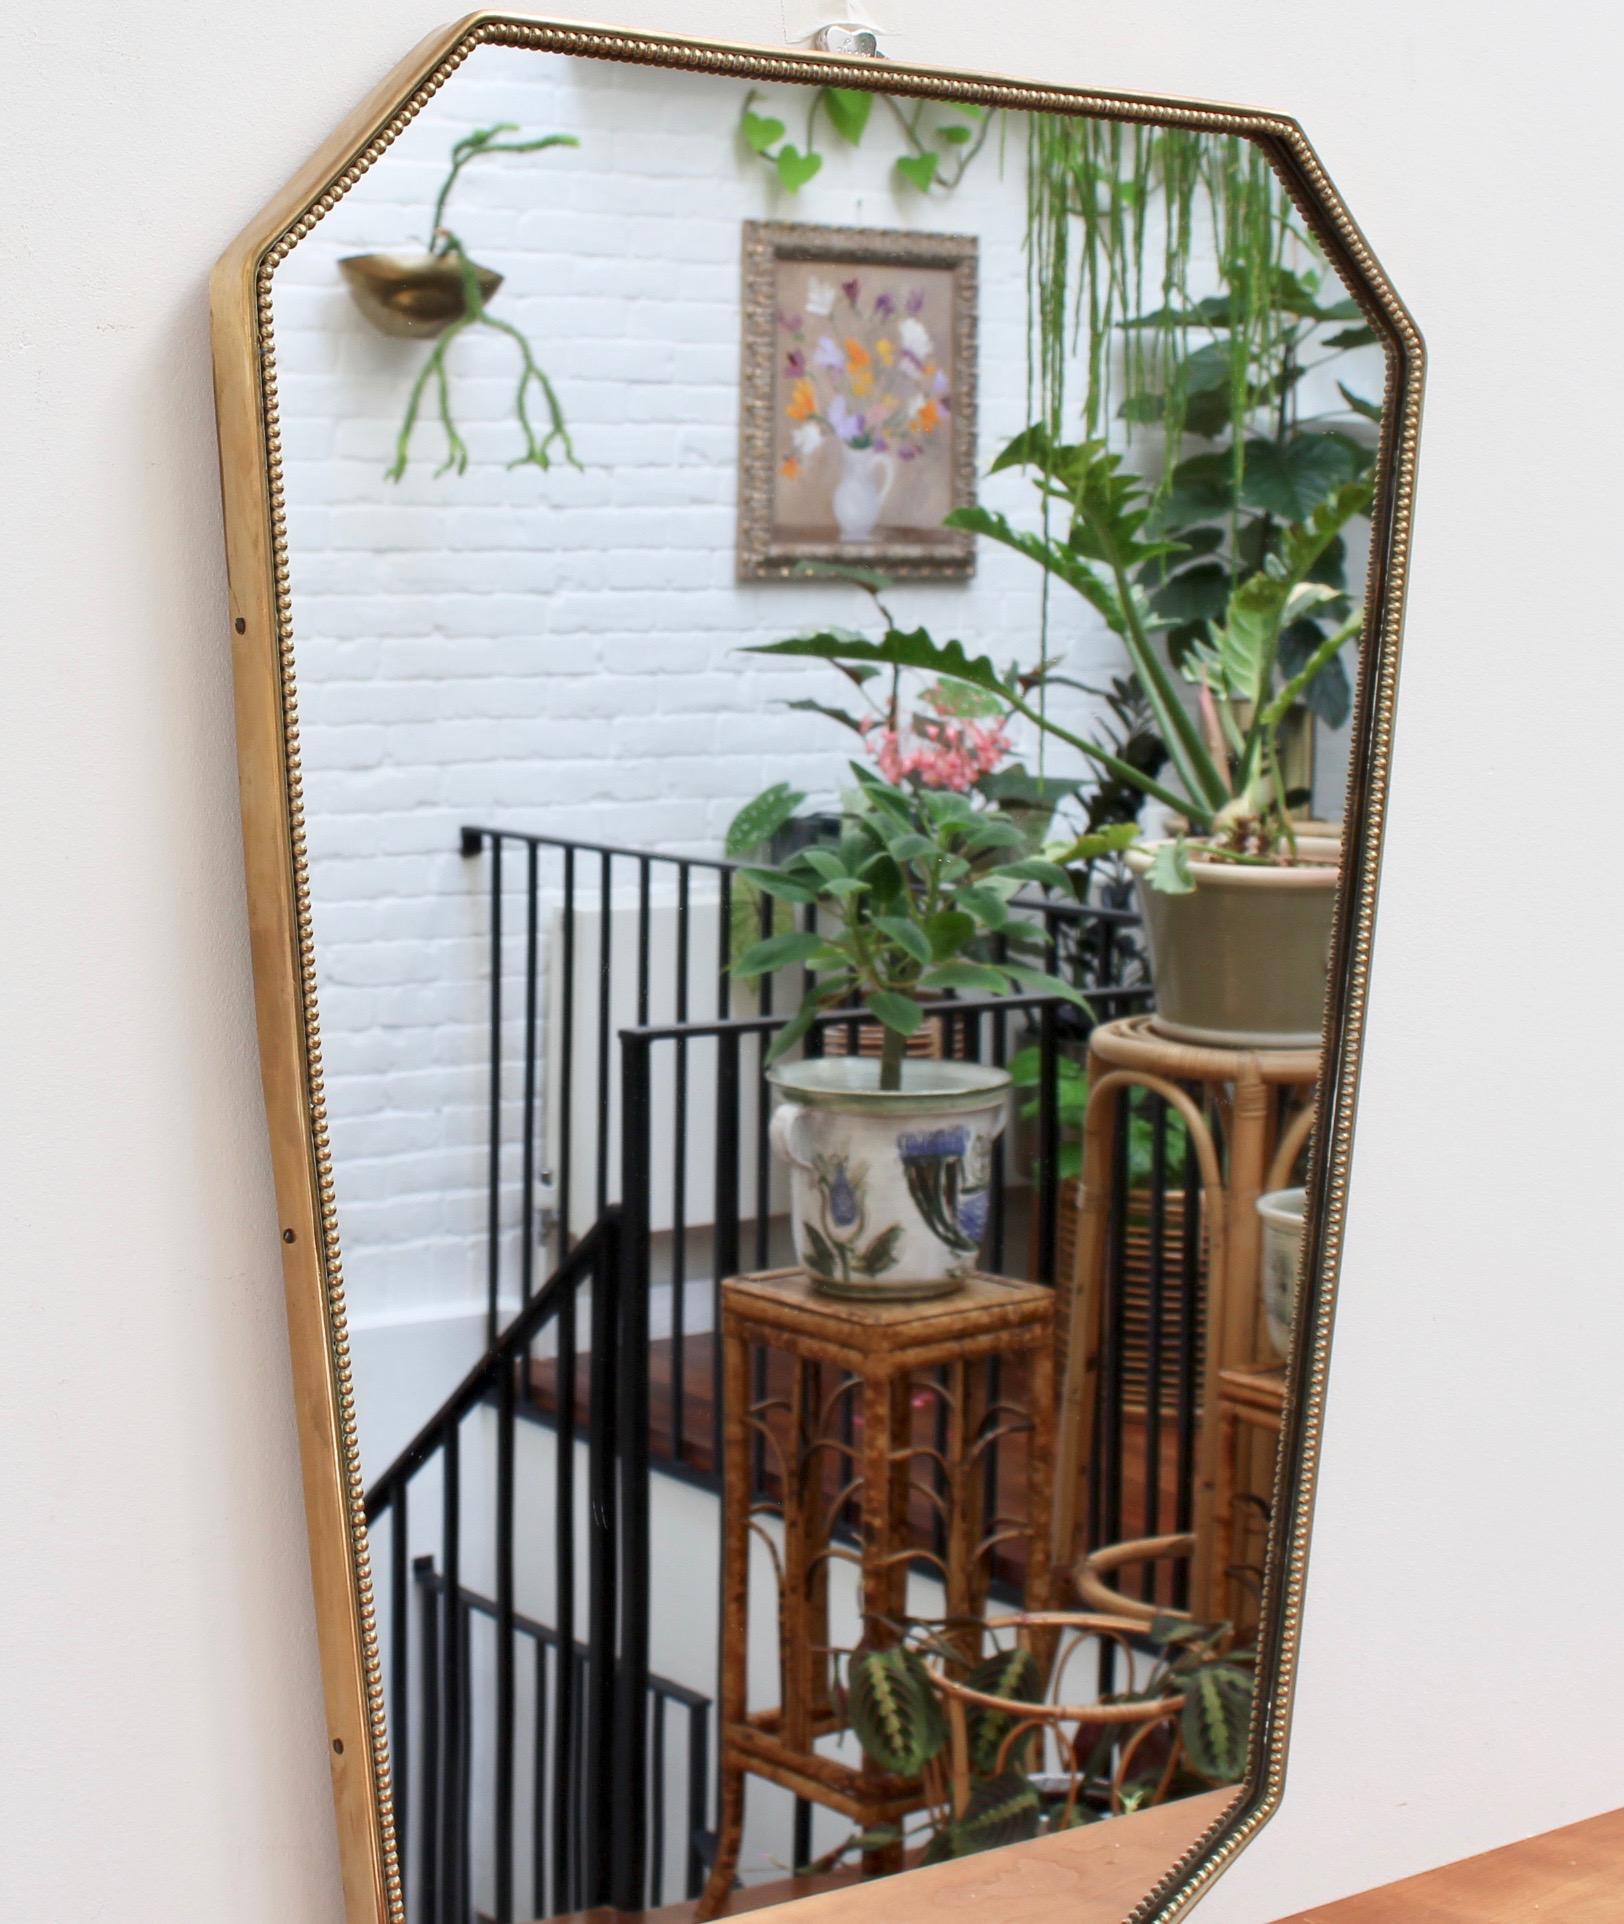 Midcentury Italian wall mirror with brass frame (circa 1950s). This mirror is simply elegant and characterful in a modern, Gio Ponti style. It is classically-shaped with confident angles and delightful beading around the brass frame. The mirror is